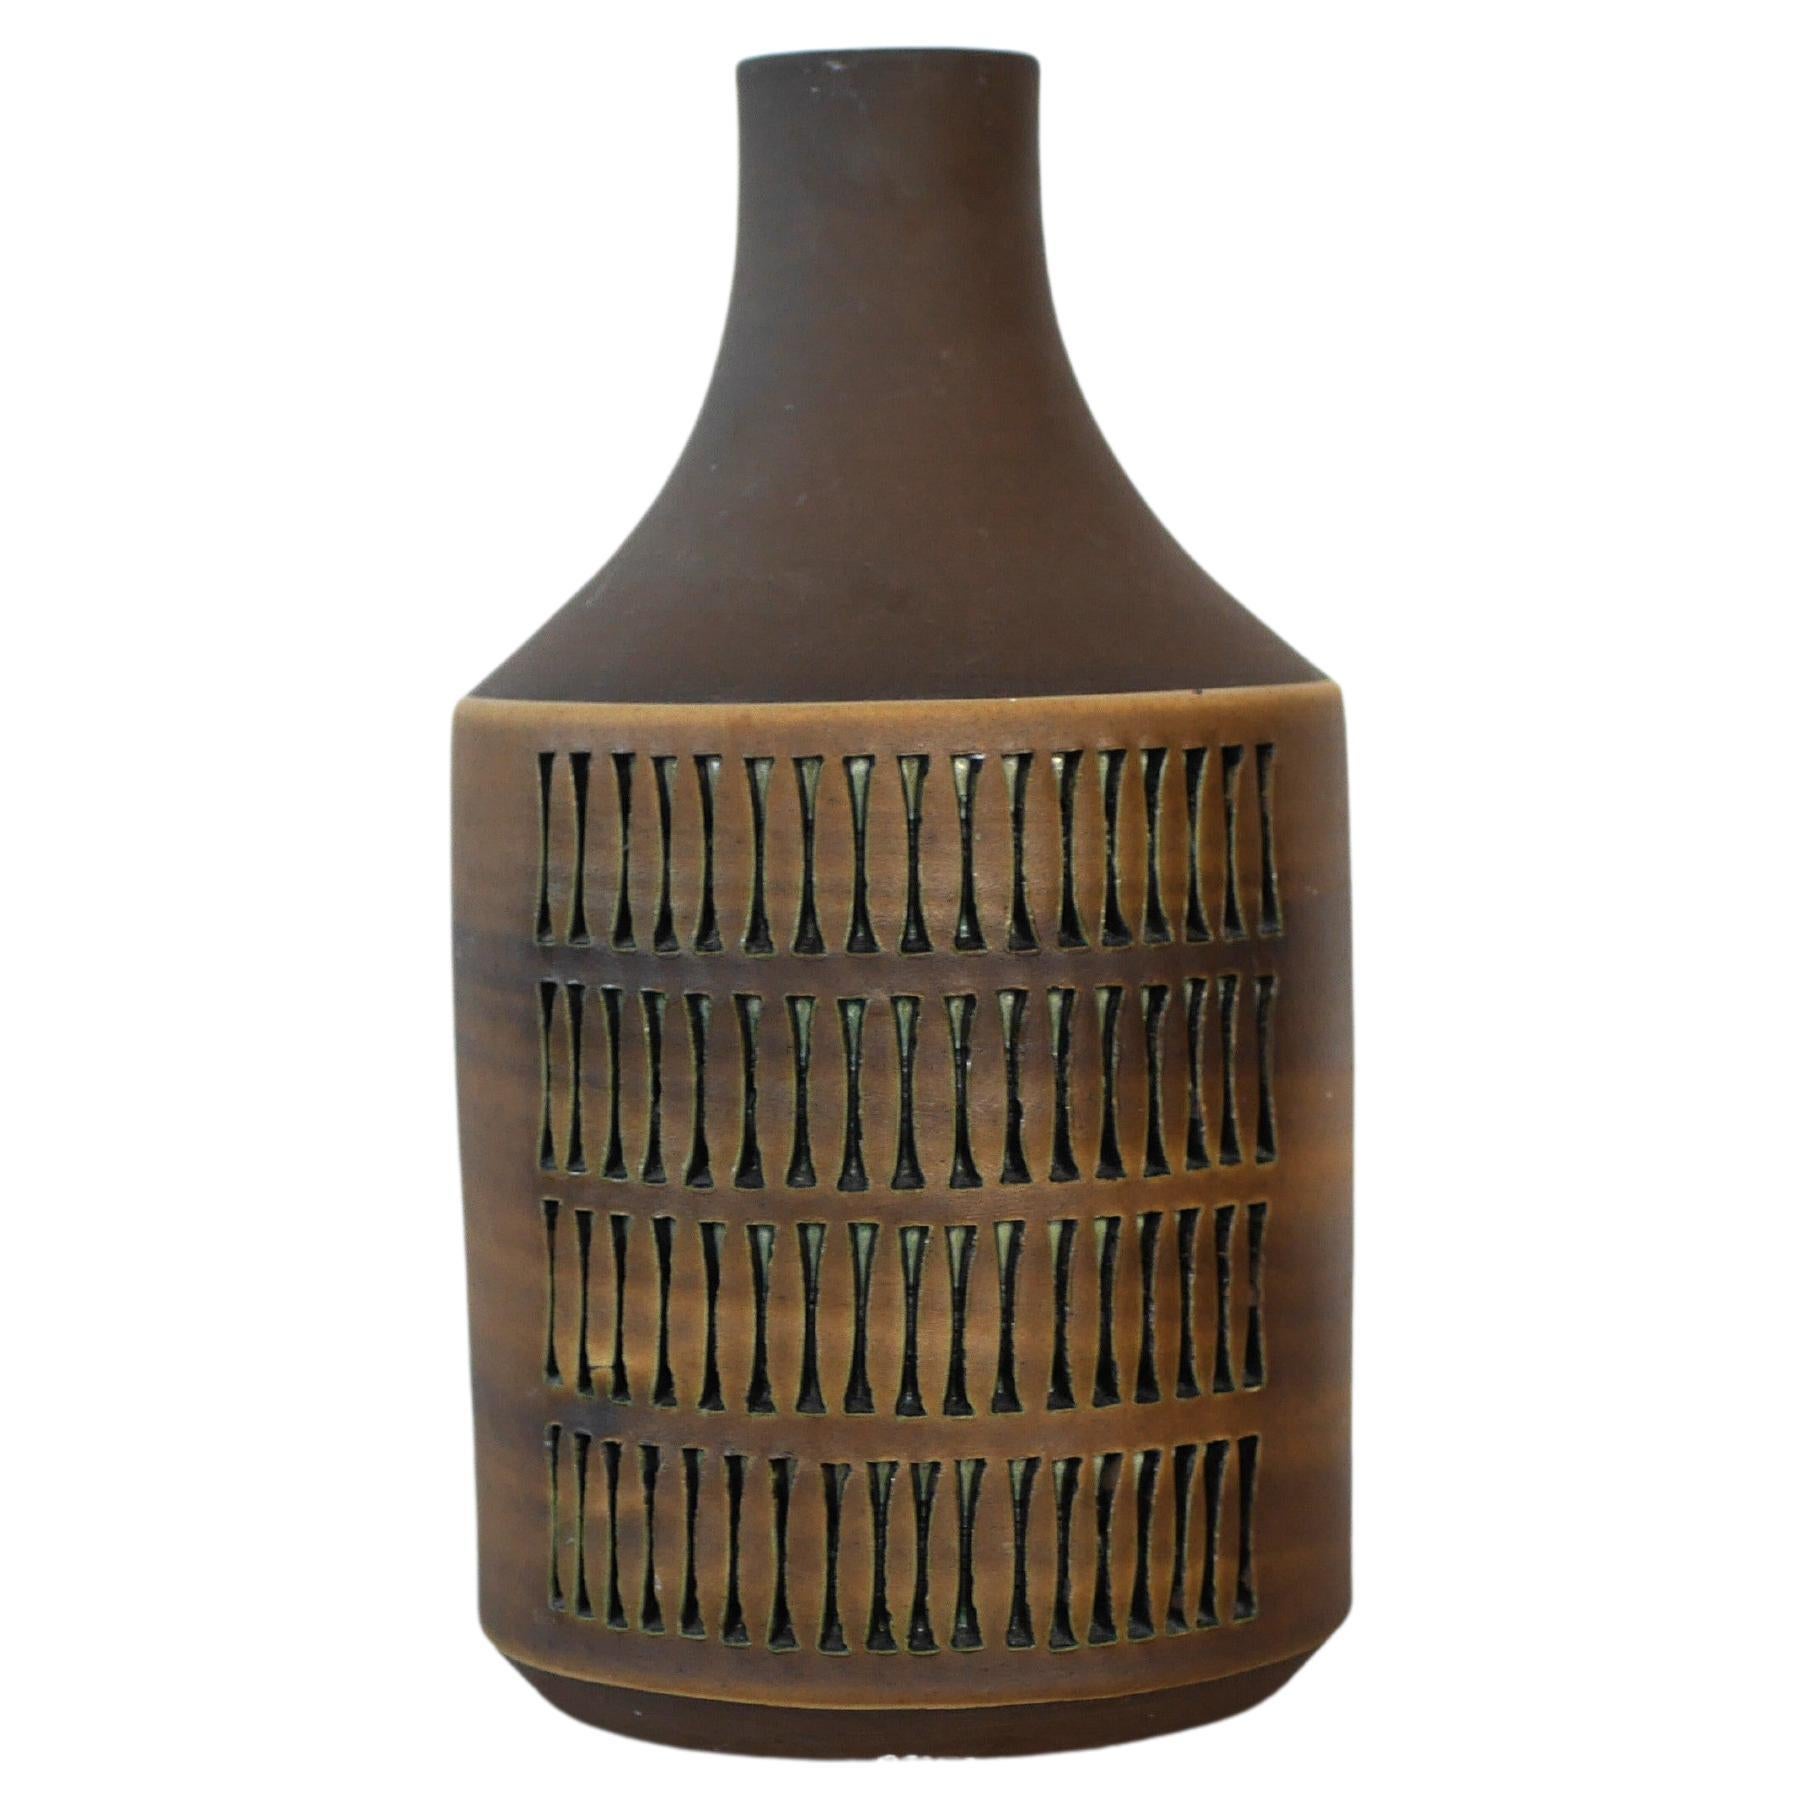 Vase from Alingsås, Sweden by Tomas Anagrius